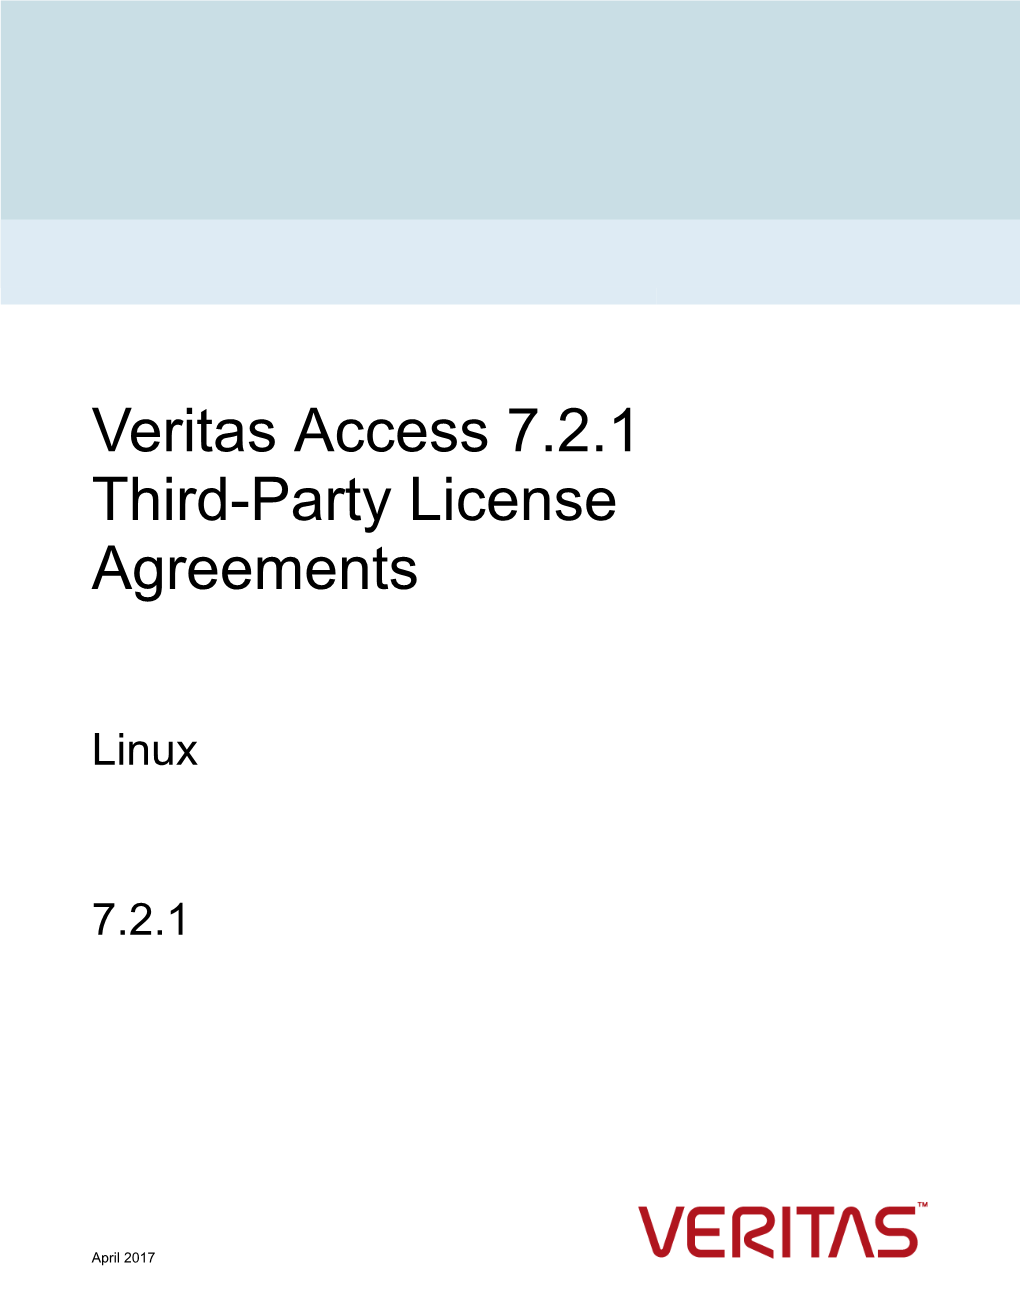 Veritas Access 7.2.1 Third-Party License Agreements : Linux